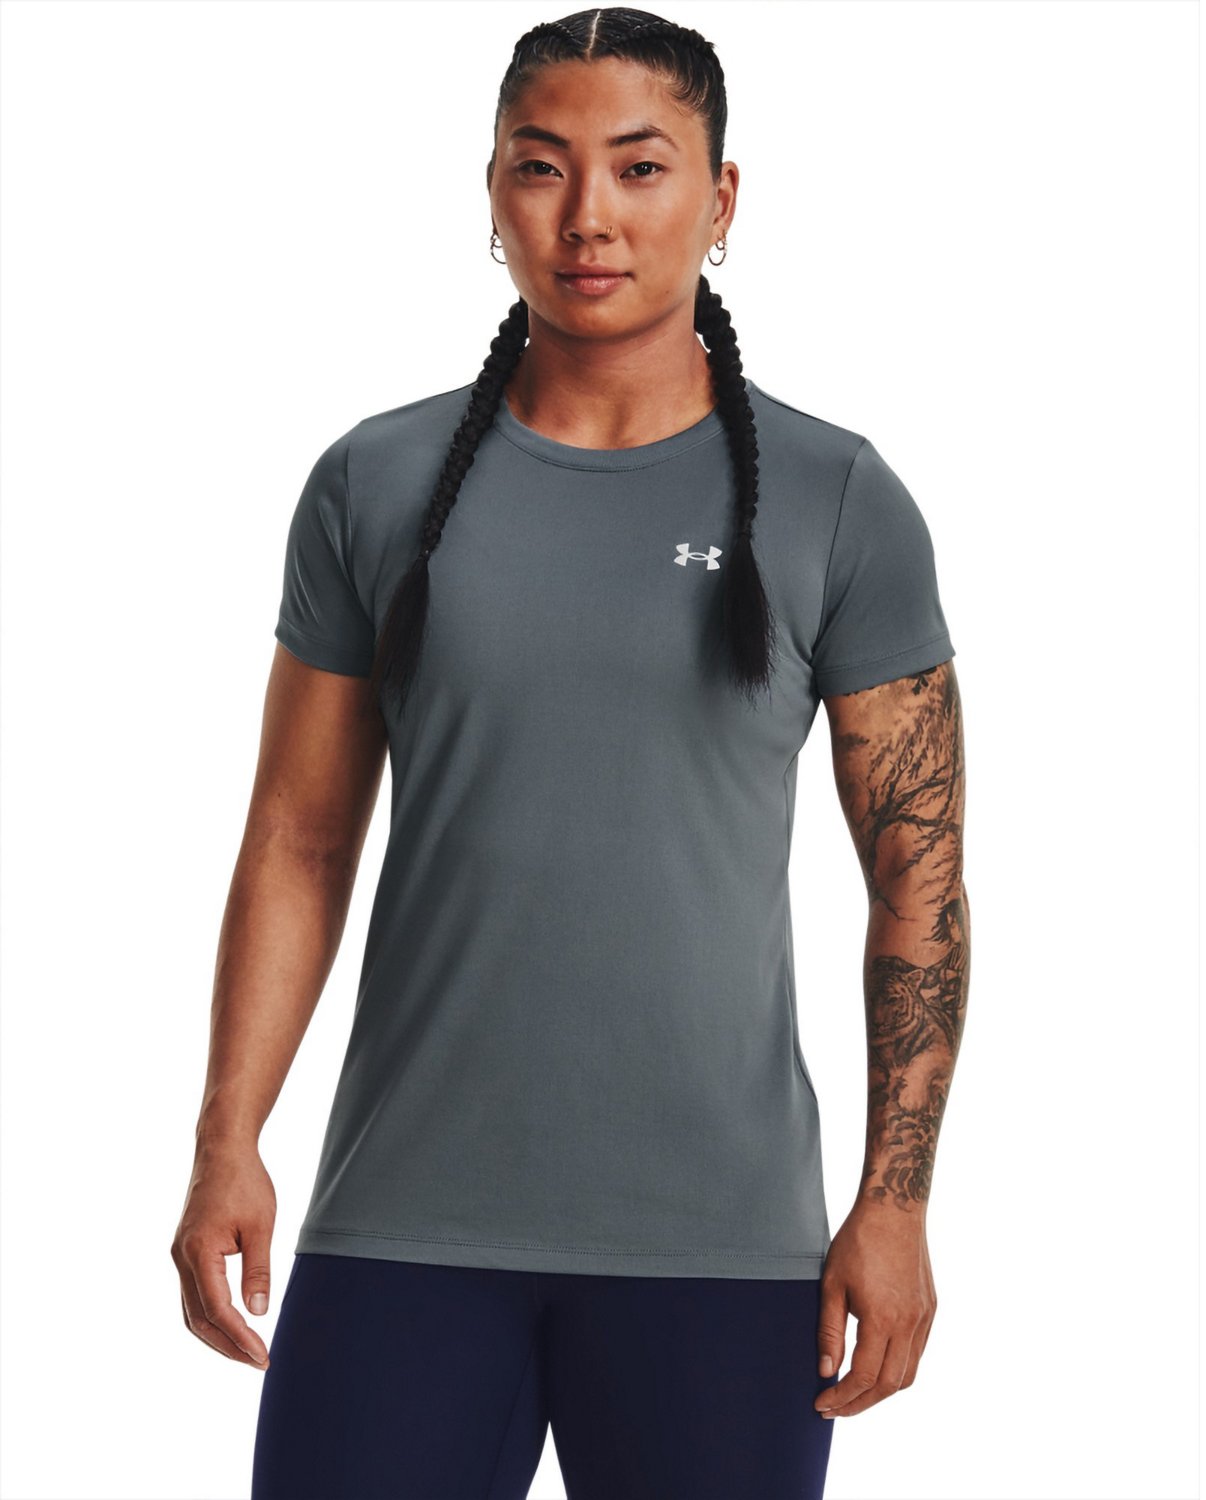 Under Armour Womens Stretch Short Sleeves Shirts & Tops Black S